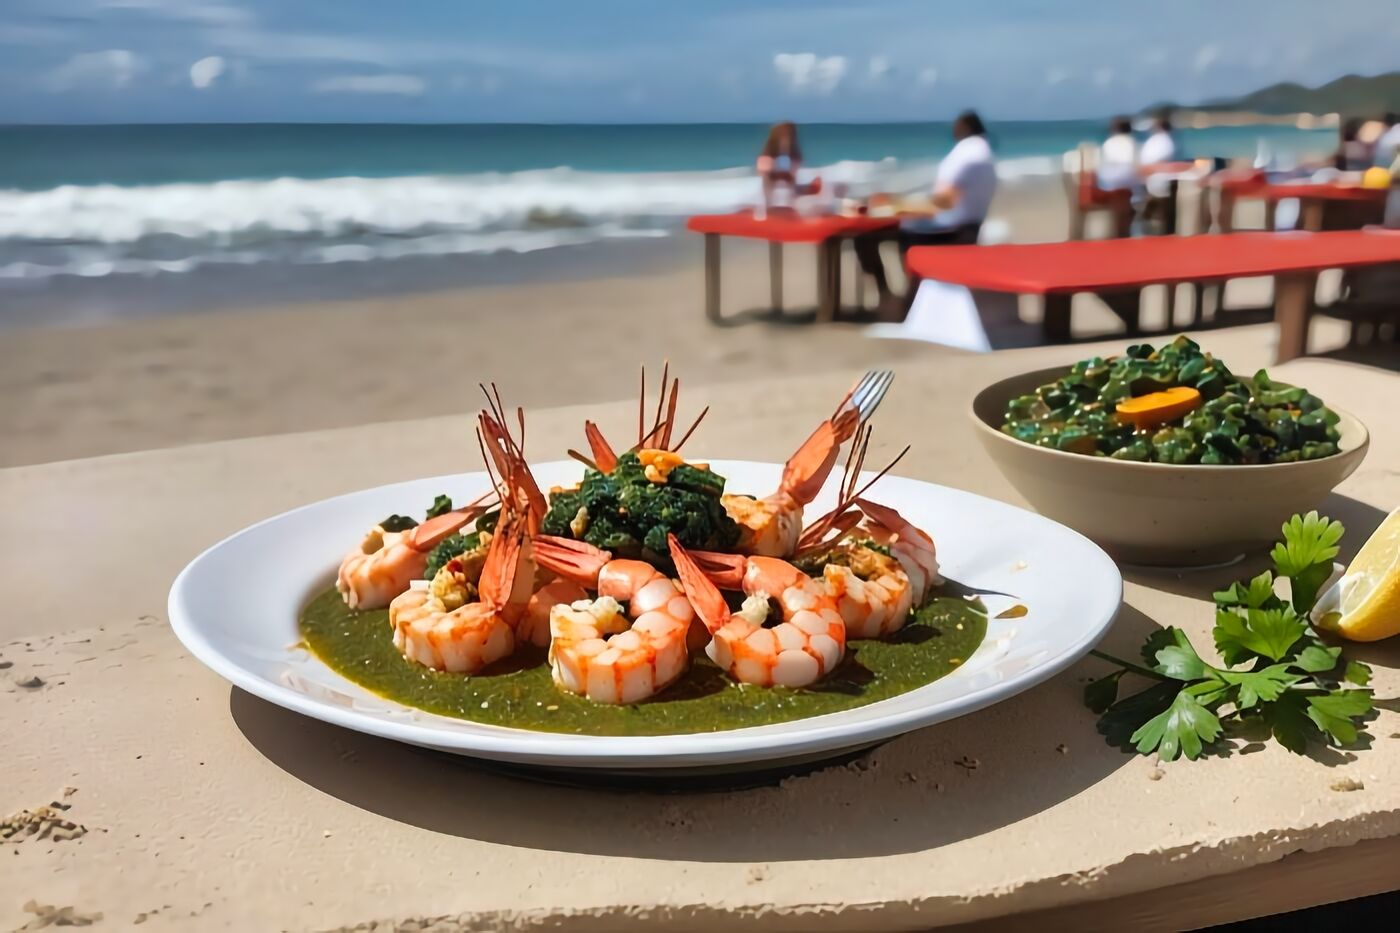 Argentine Red Shrimp With Chimichurri